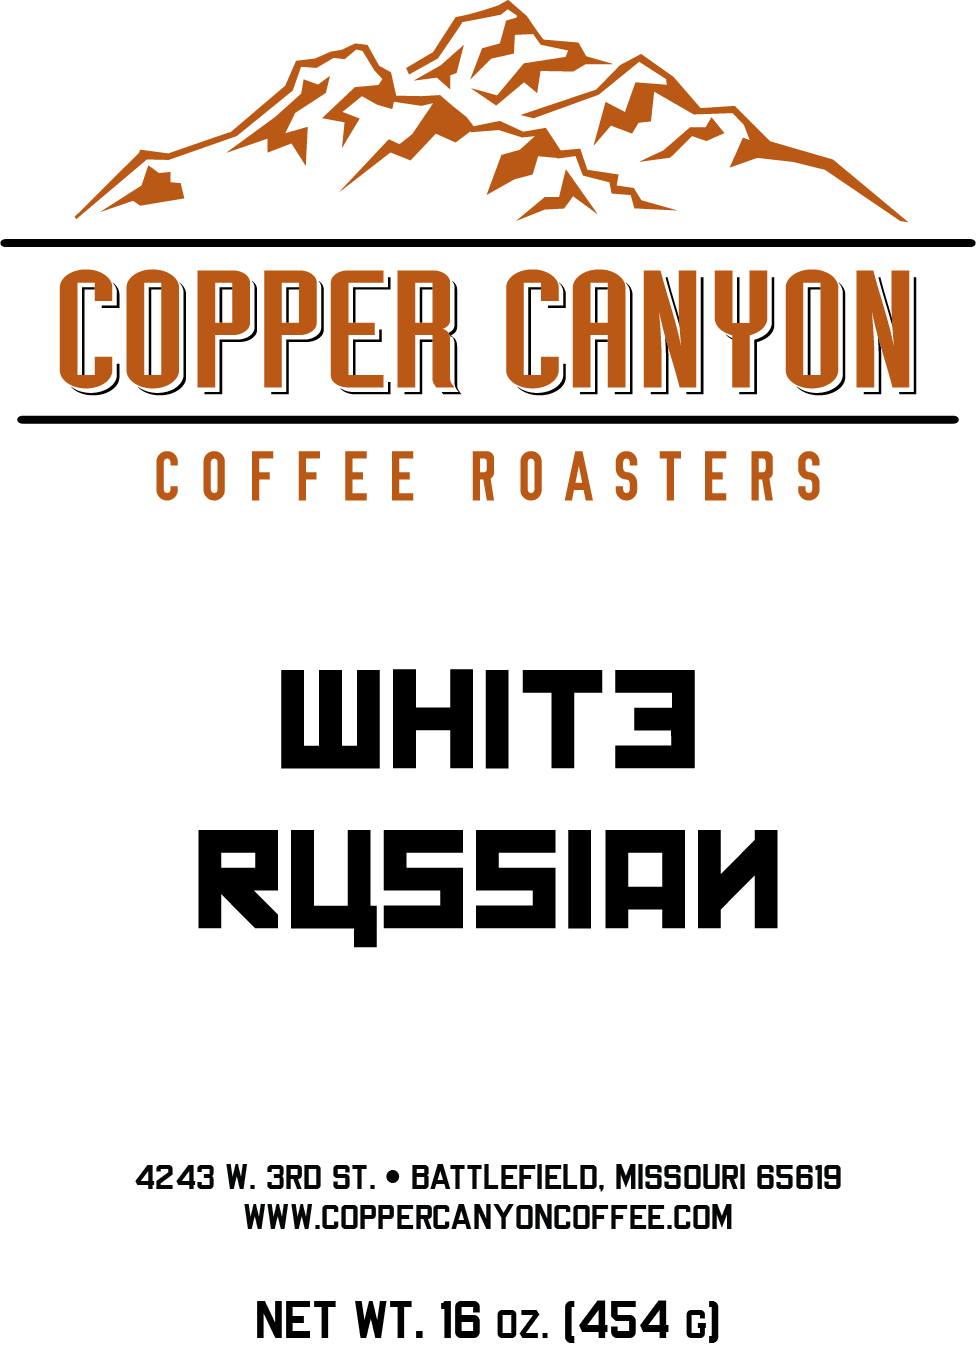 White Russian Flavored Coffee